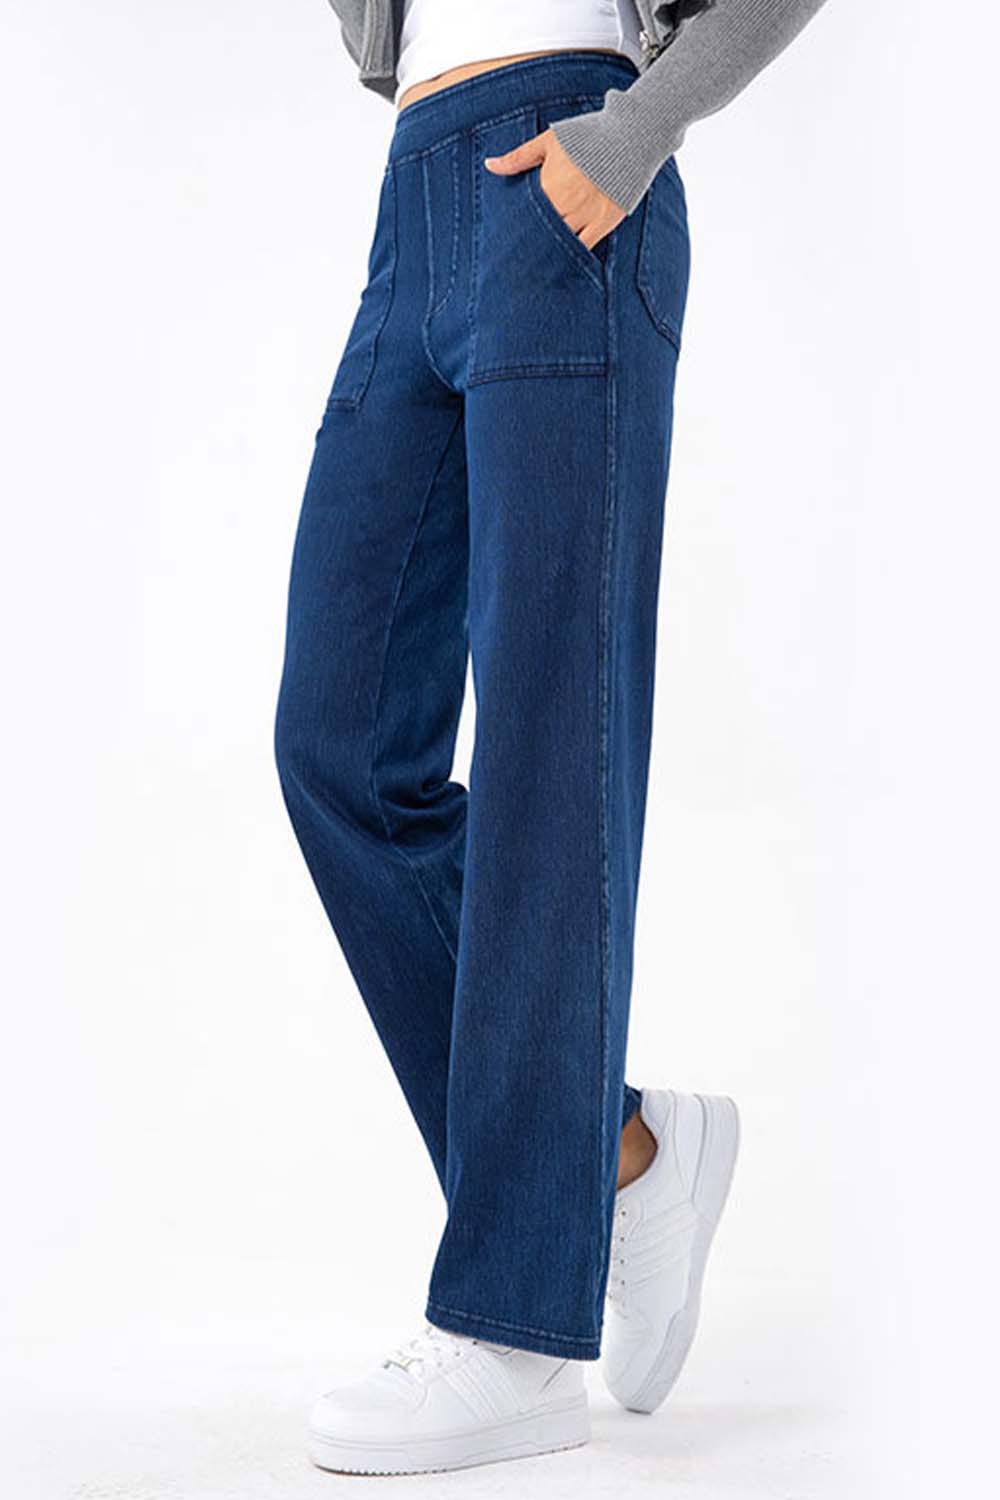 Trendsi Jeans Pocketed Long Jeans